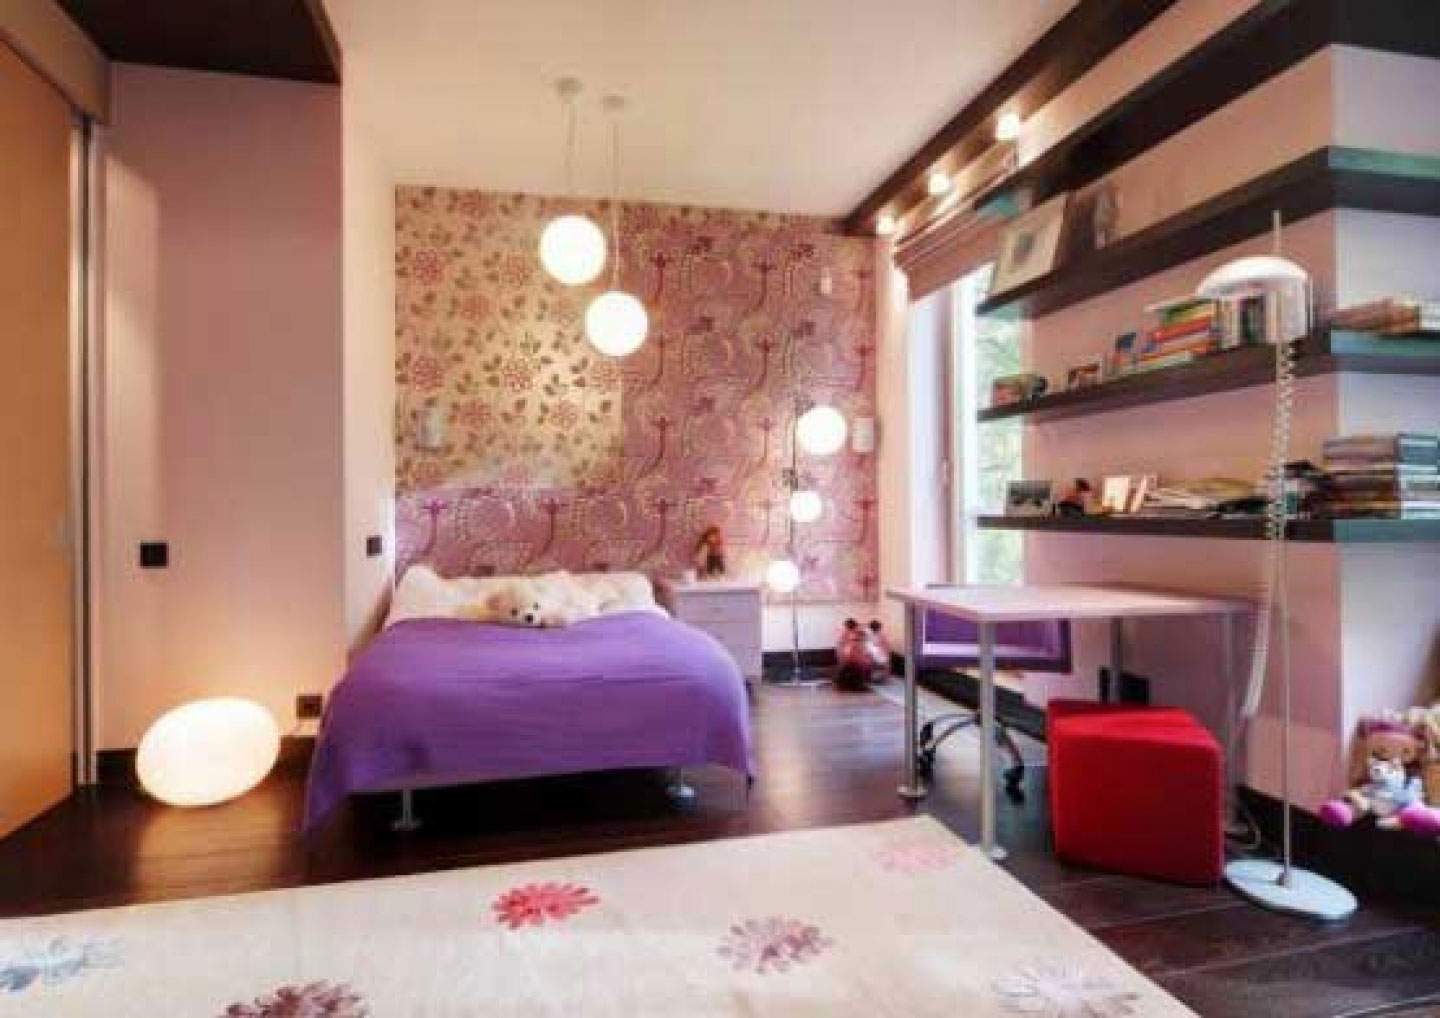 And Wonderful For Comfortable And Wonderful Bedroom Design For Young Women With Purple Linen And Simple Wall Shelving  Bedroom Ideas For Young Women In Modern Design 